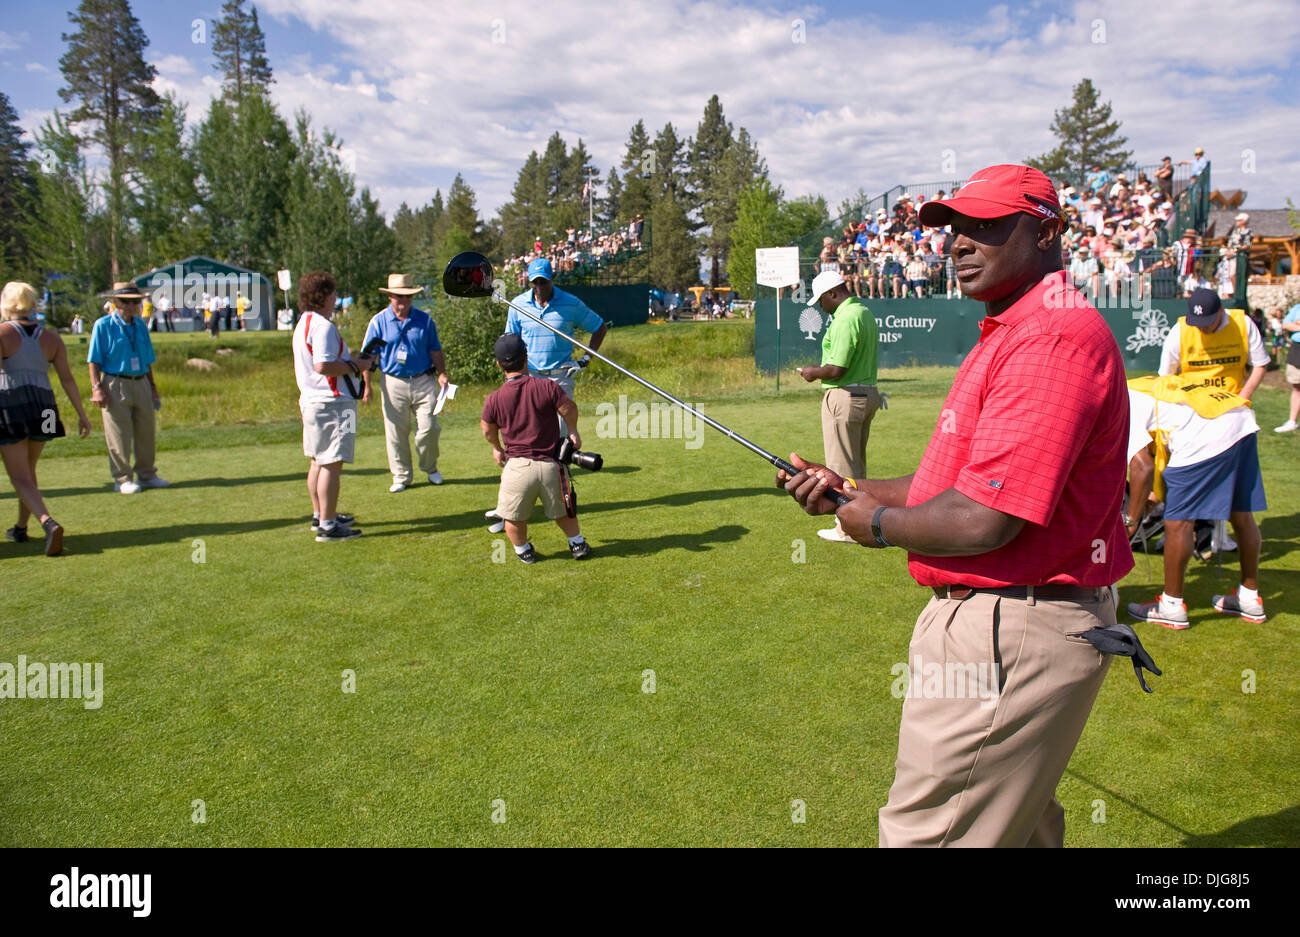 July 16, 2010 - Stateline, Nevada, USA -  Former NFL All-Pro receiver STERLING SHARPE eyes the first fairway before teeing off at the 21st annual American Century Championships at the Edgewood Tahoe Golf Course.  Offering a total purse of 600,000 dollars, the made-for-tv ACC, owned and broadcast by NBC Sports, is the world's premier celebrity golf tournament.  For the fifth year in Stock Photo